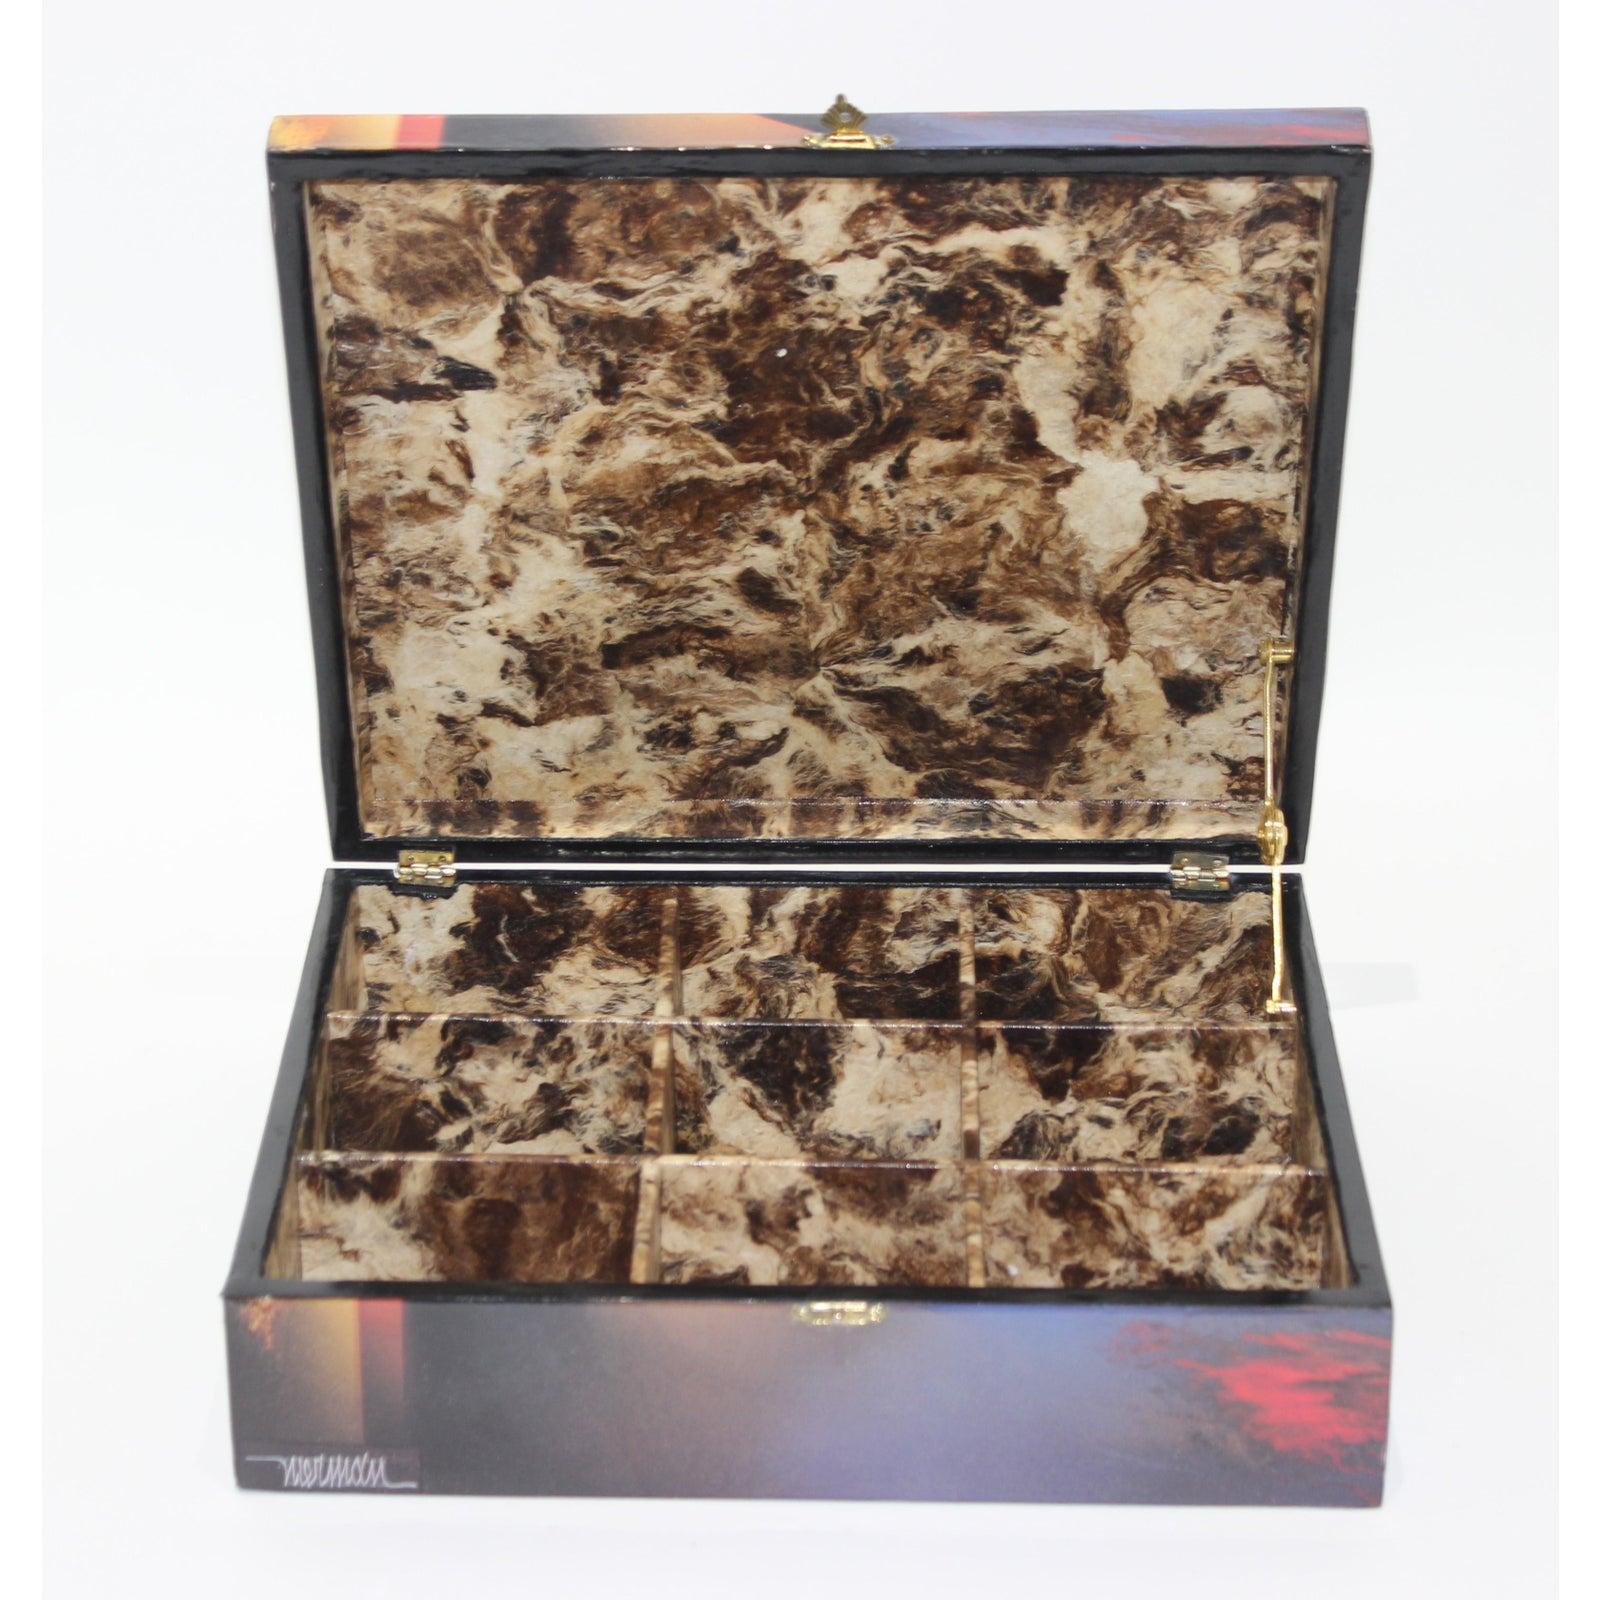 This stylish artisan created storage box dates to the 1990s and was created in a limited edition (23/200) and is fabricated in a marbalized paper (on the inside) and printed paper (outside) that has a clear coat of resin. The piece is signed by the